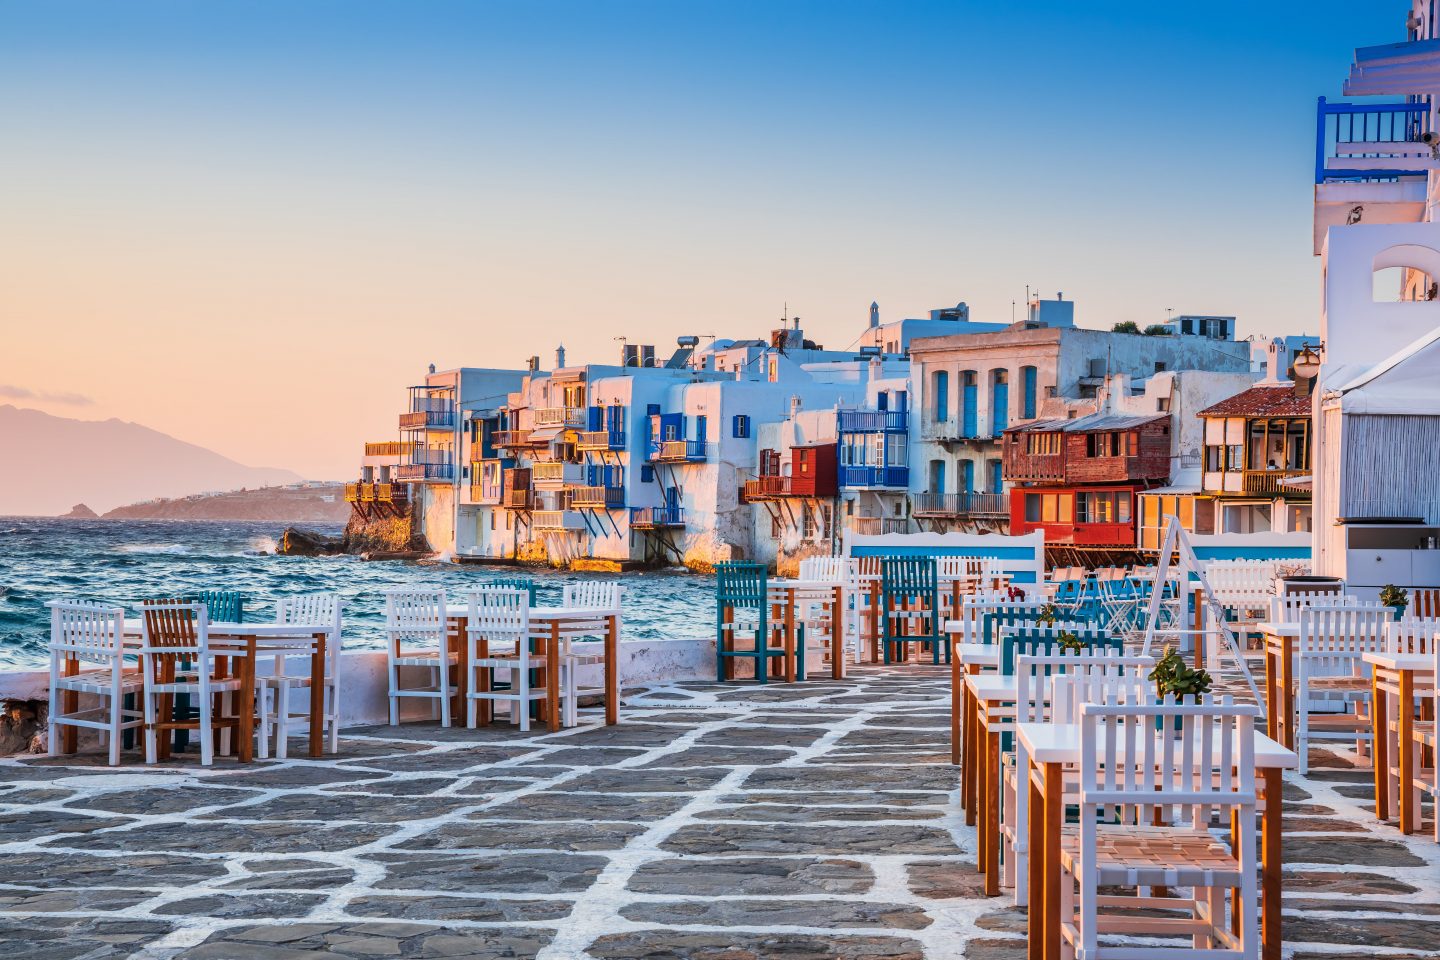 Turn a trip to the Cyclades into a lifetime experience